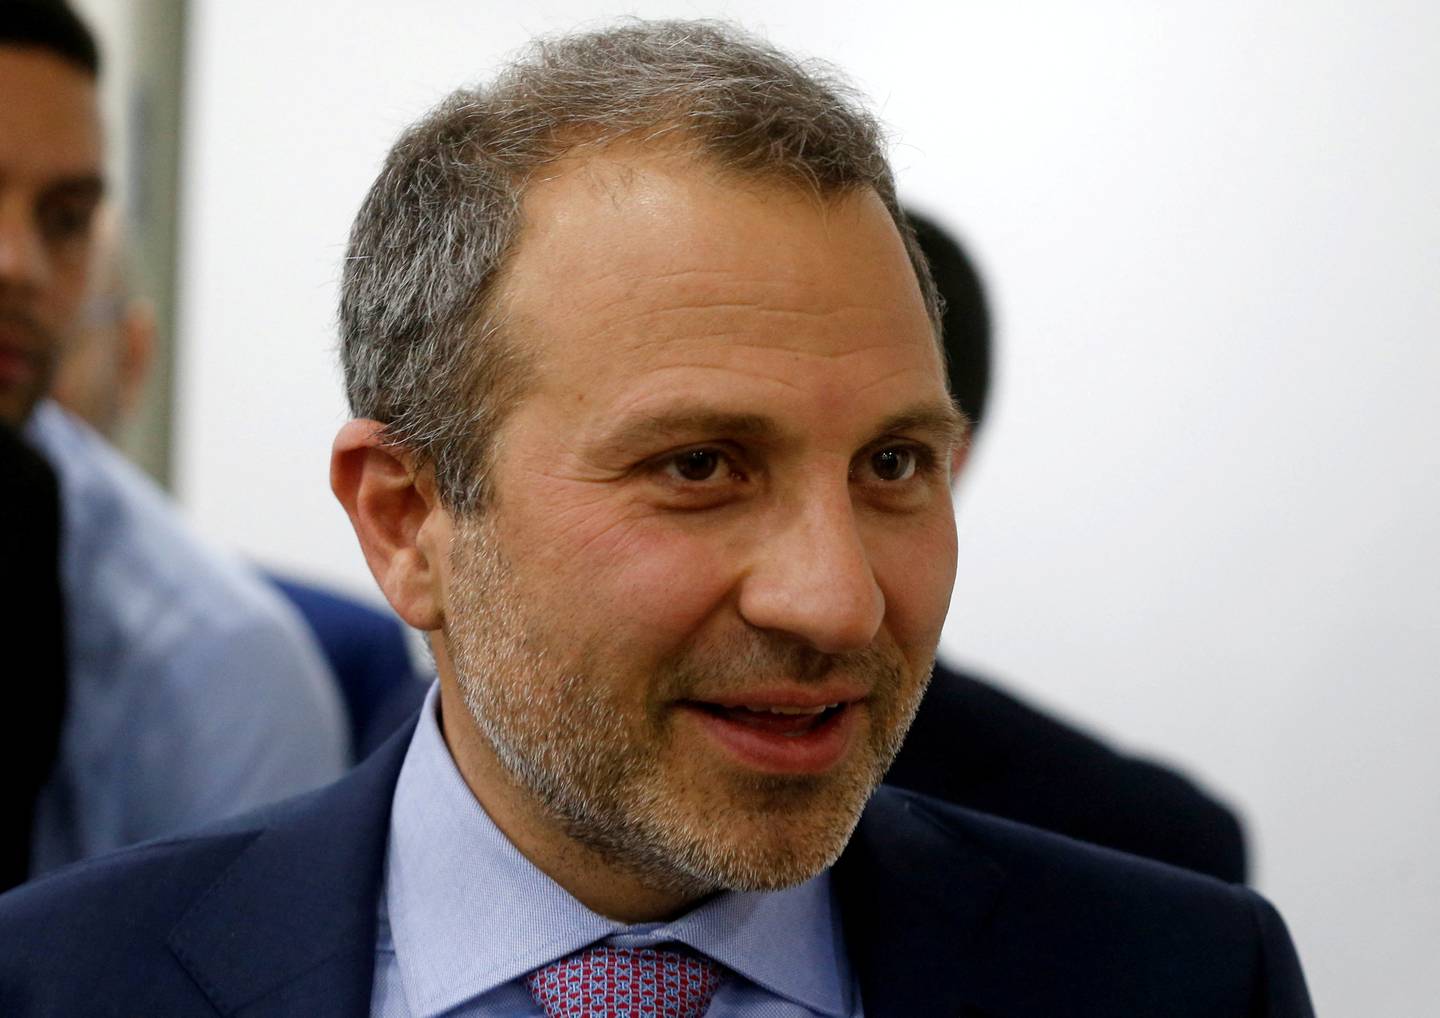 Gebran Bassil was included under US sanctions in 2020 over allegations of corruption. Reuters